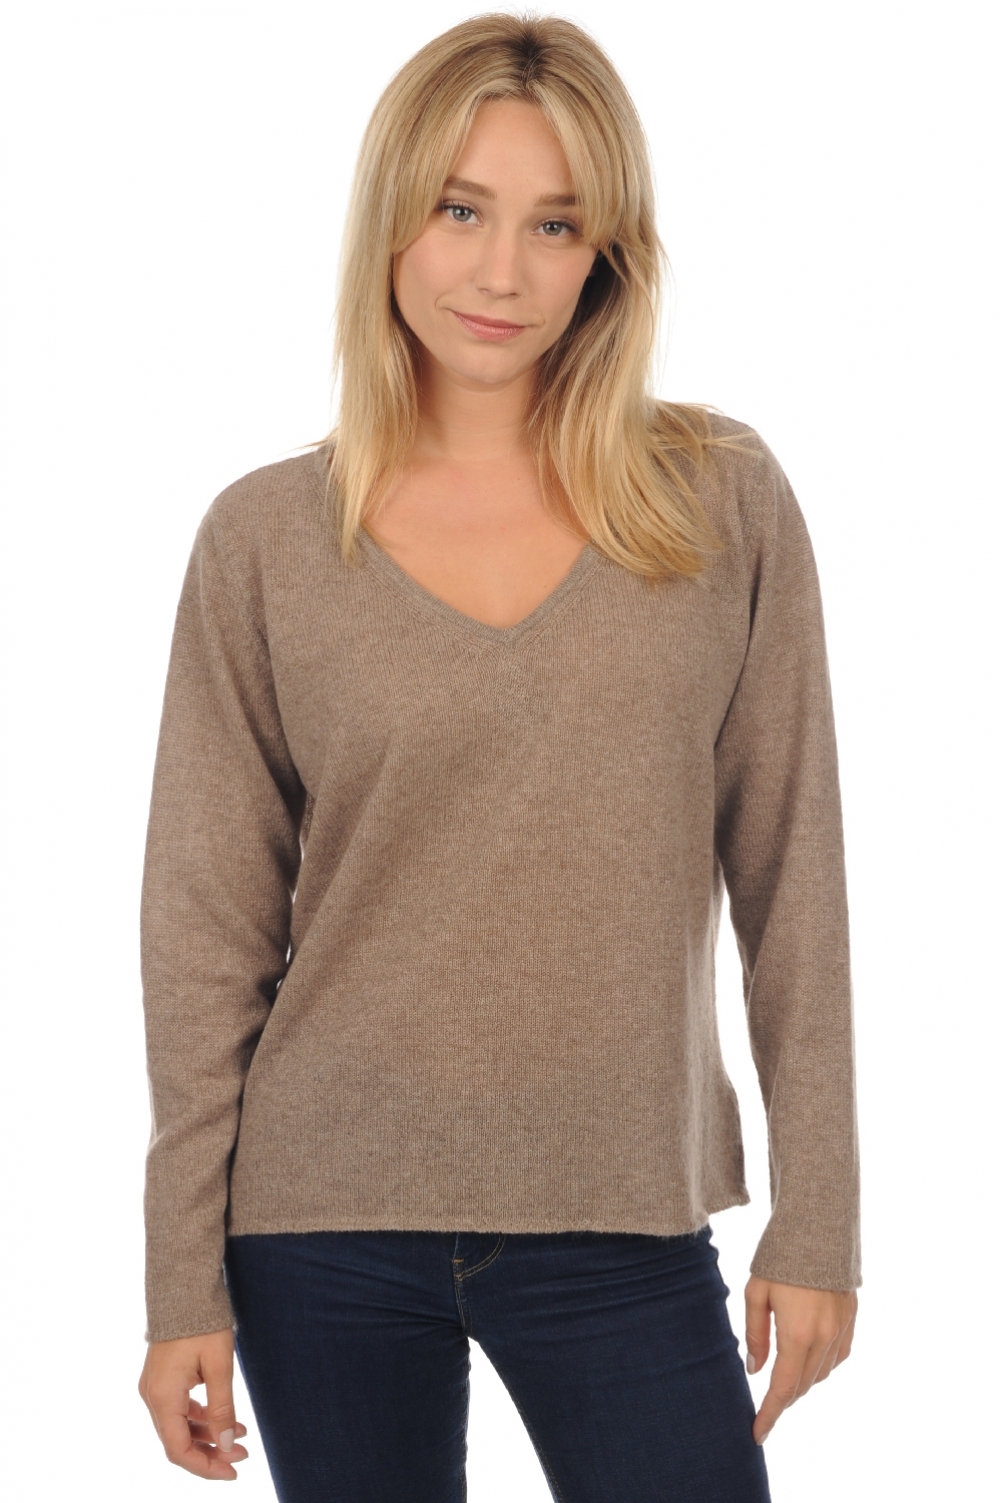 Cashmere ladies basic sweaters at low prices flavie natural brown xs